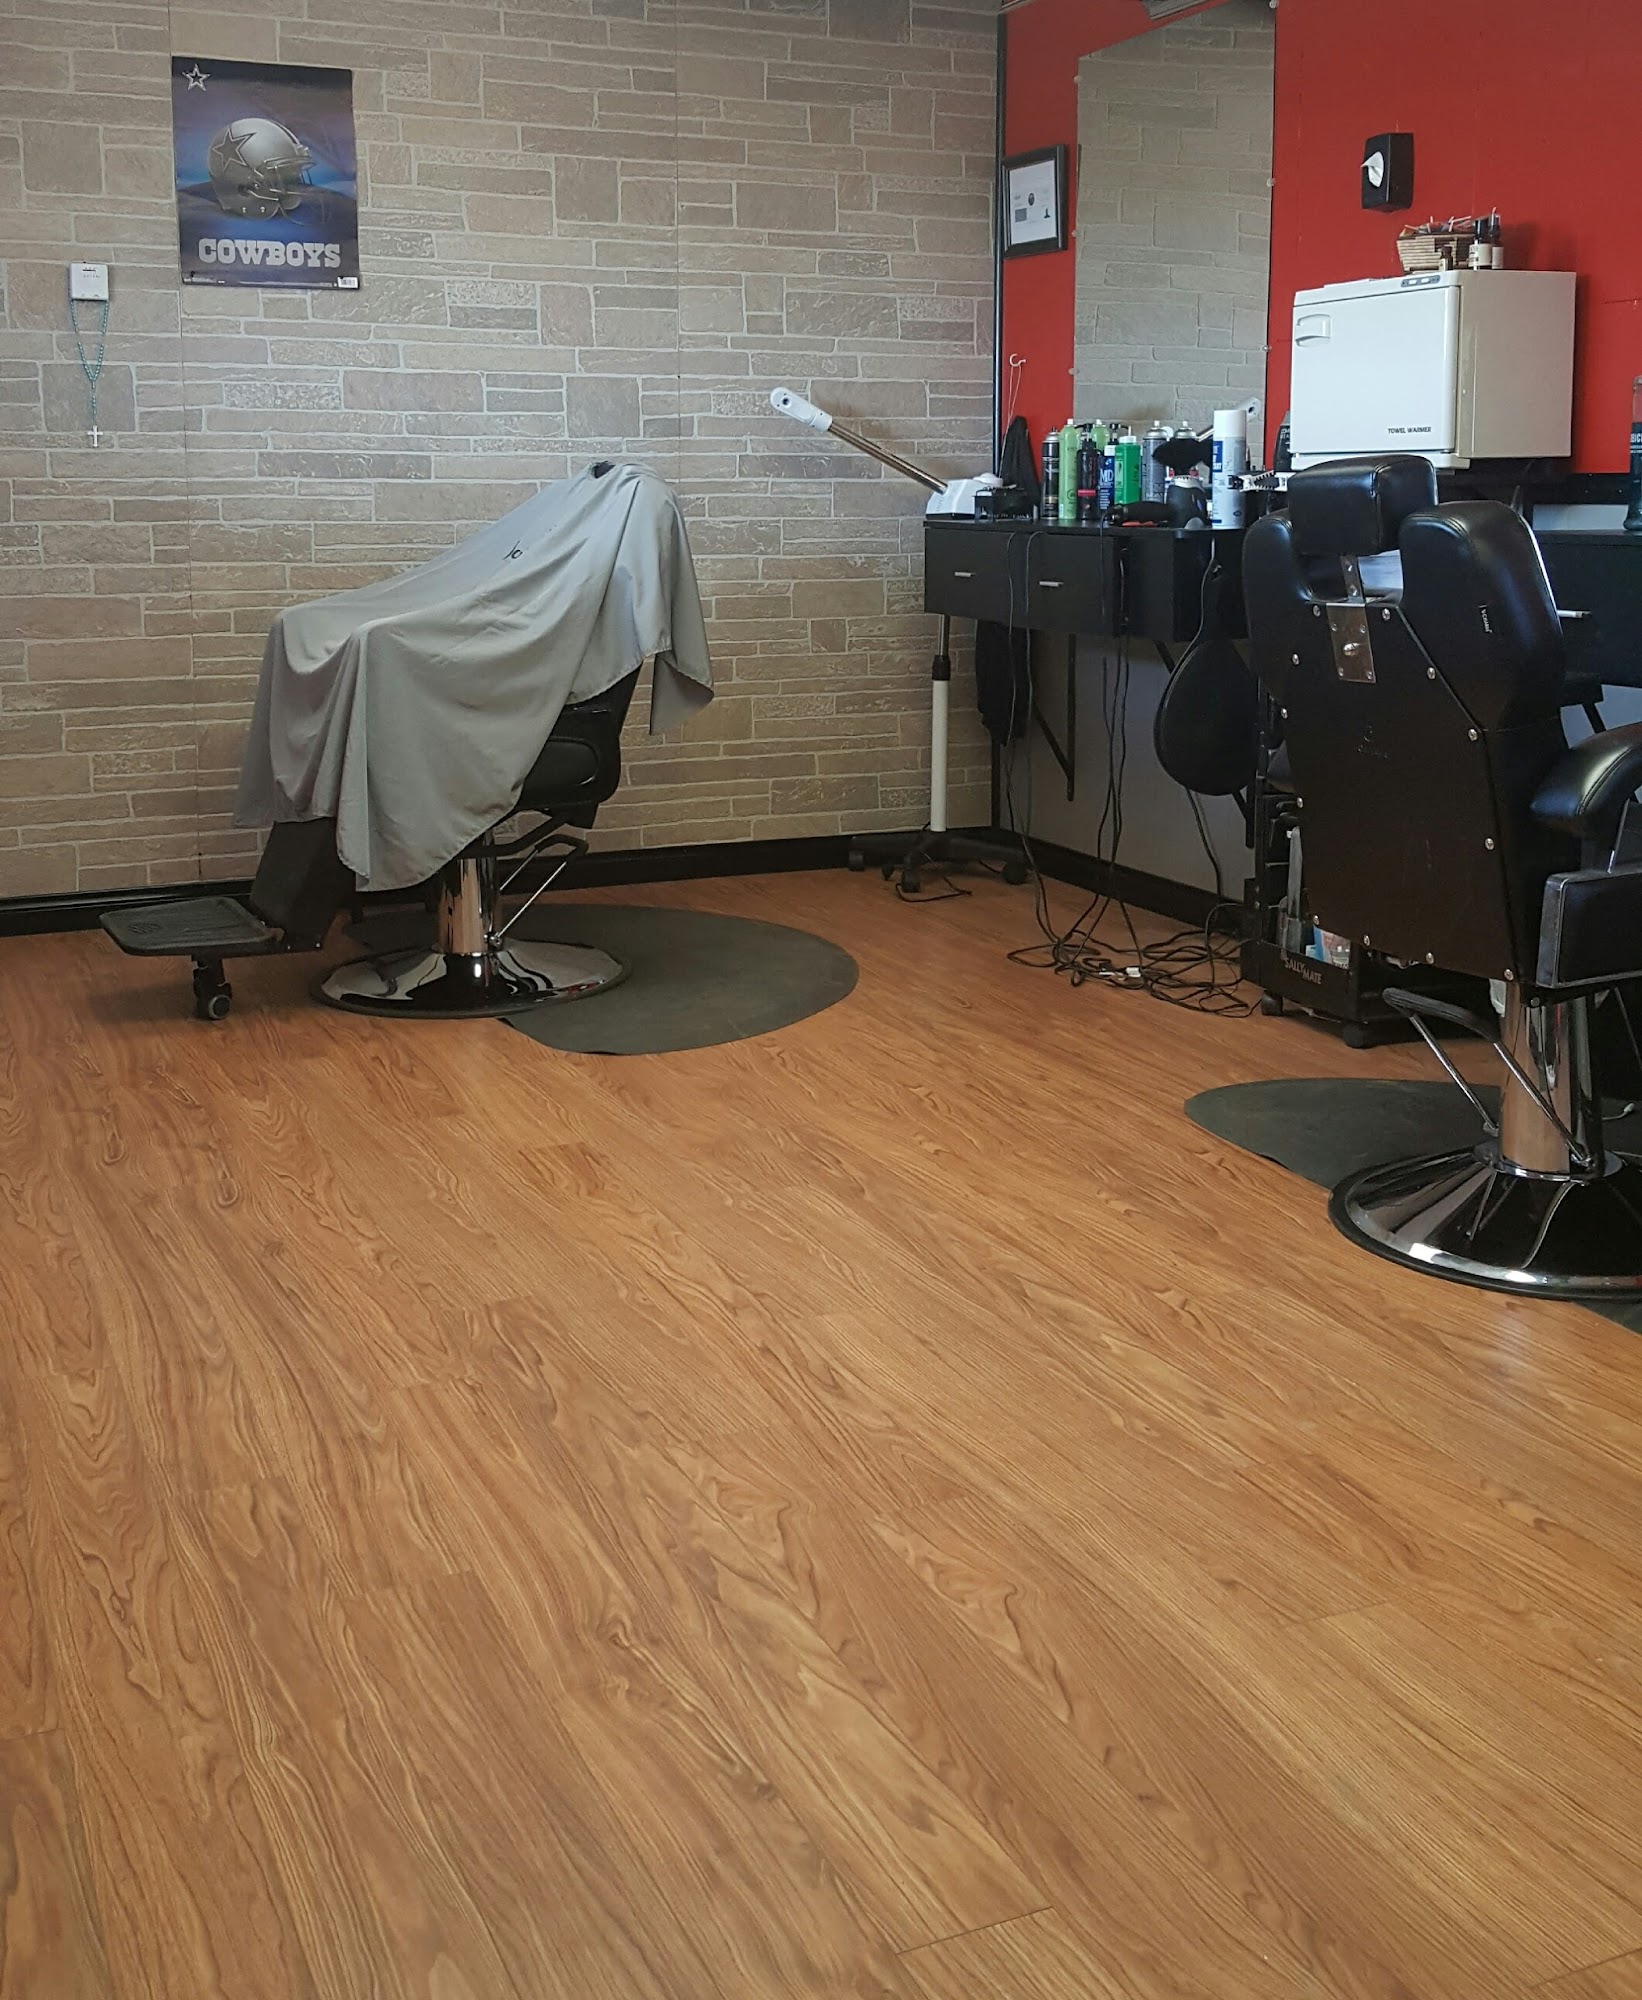 HAIR STUDIO 371 (Formerly known as Phil's Barber Shop) 51000 CA-371, Aguanga California 92536